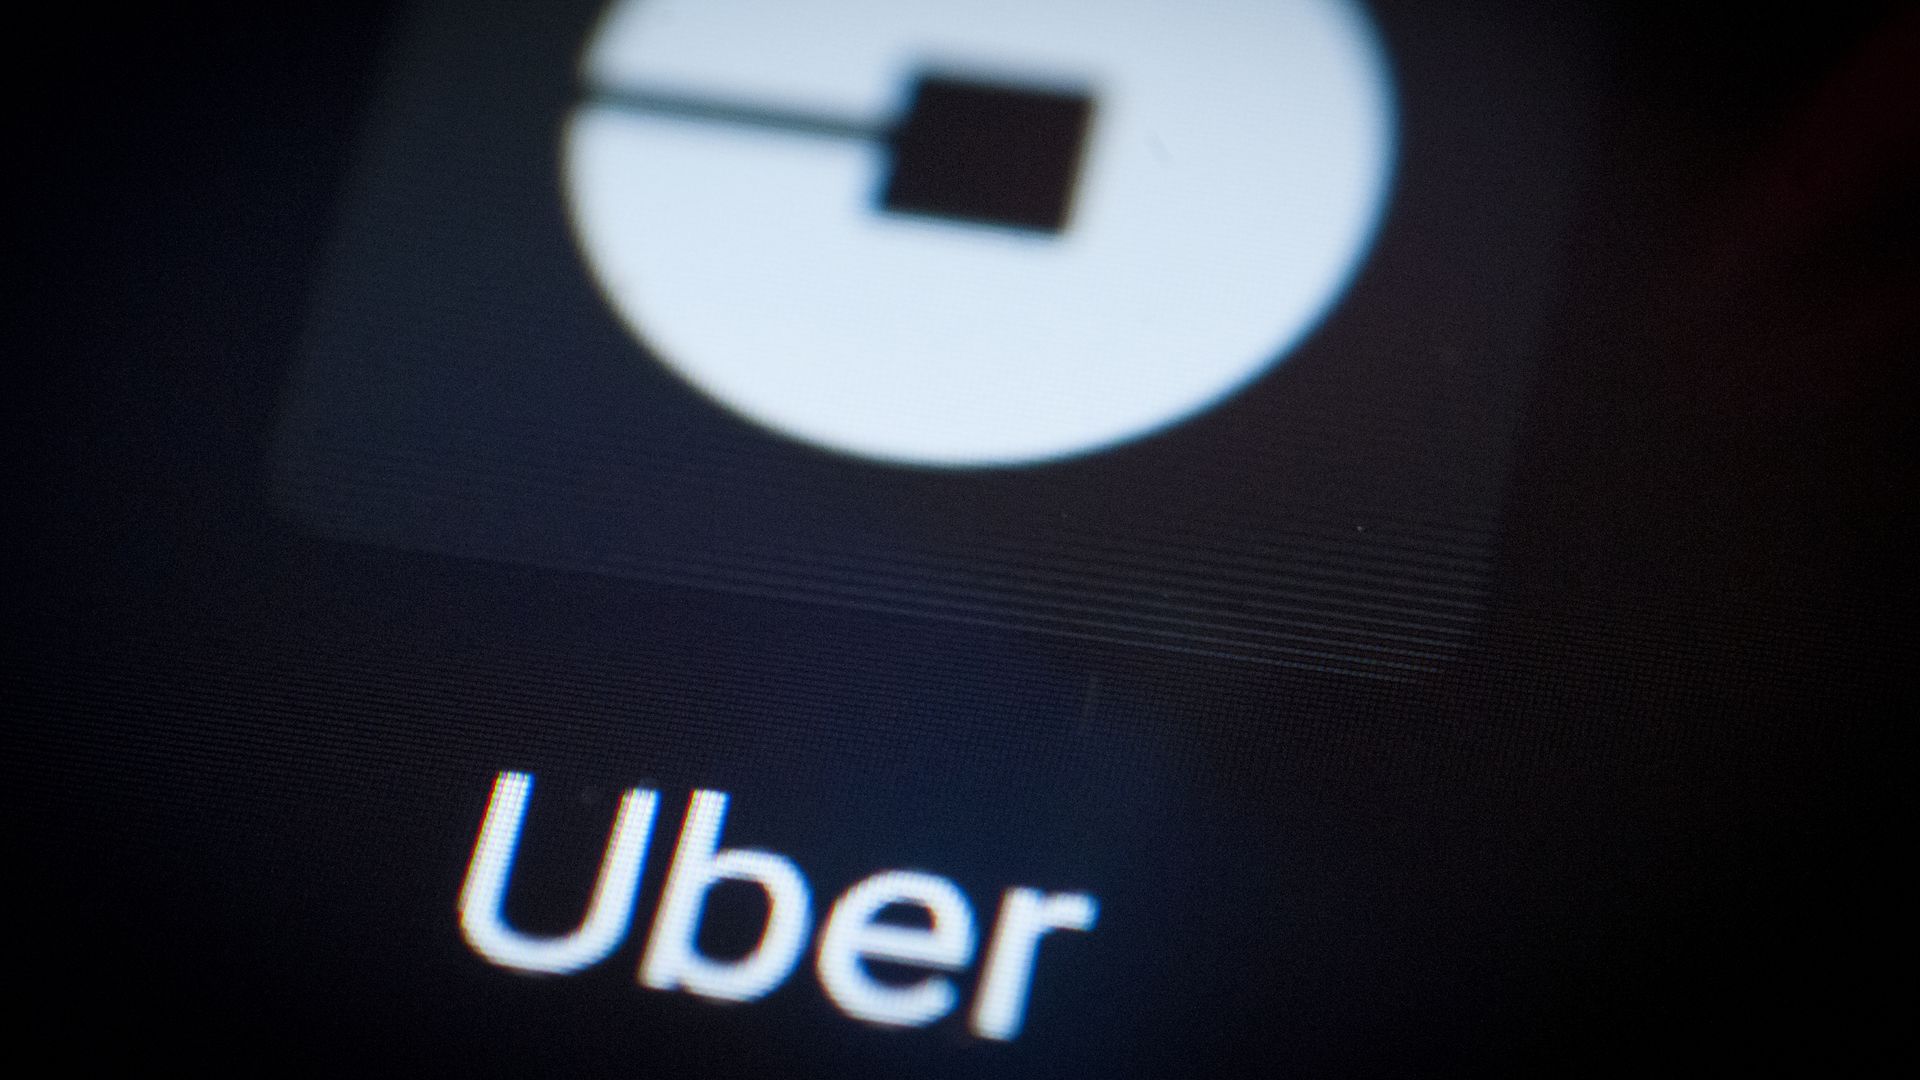 Uber logo on a mobile cell phone screen. Photo by Jaap Arriens/NurPhoto via Getty Images